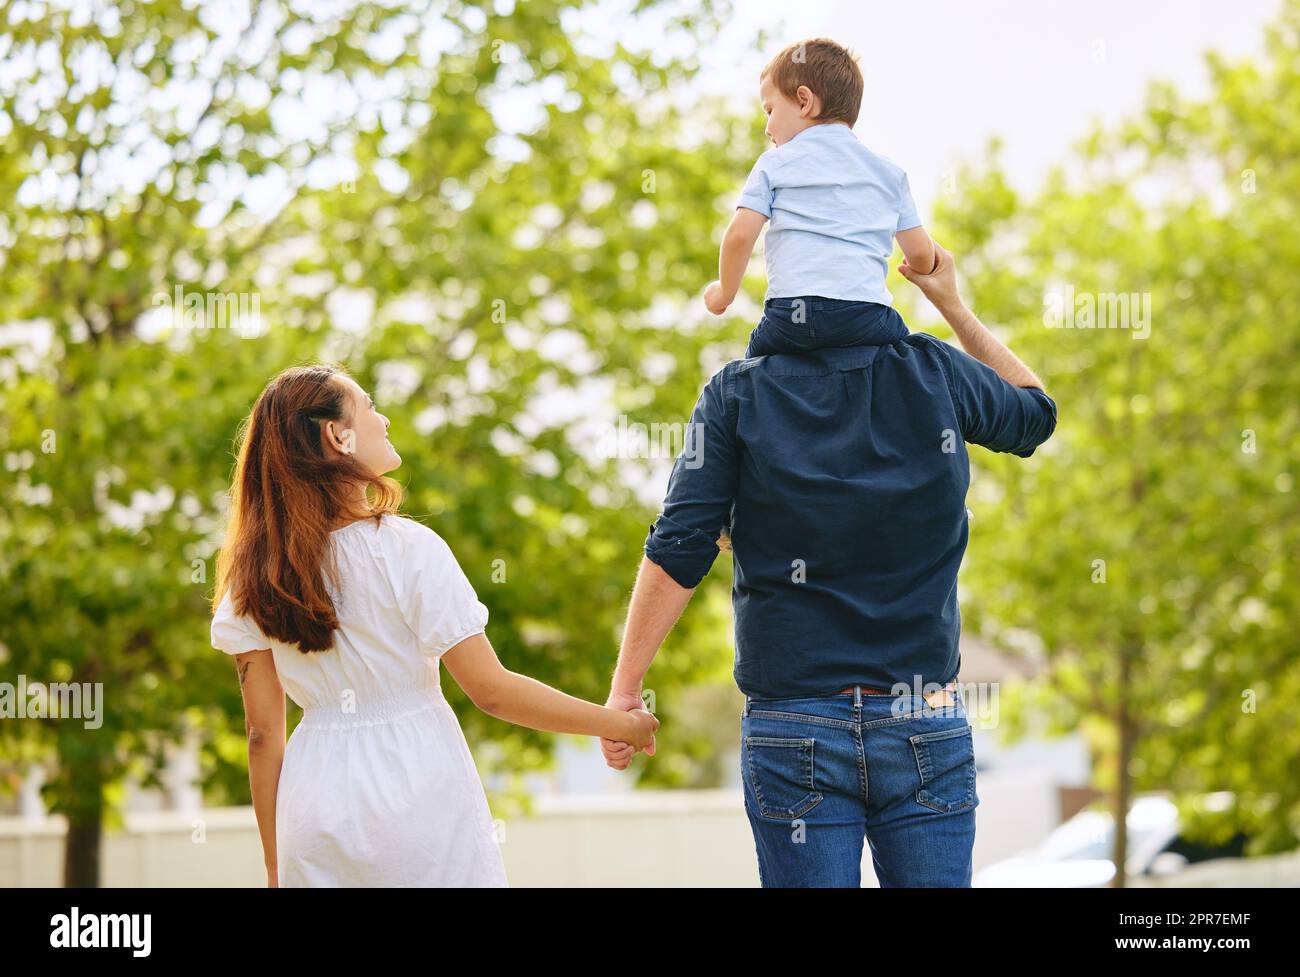 Walks with the family. Shot of a family taking a walk in the park. Stock Photo